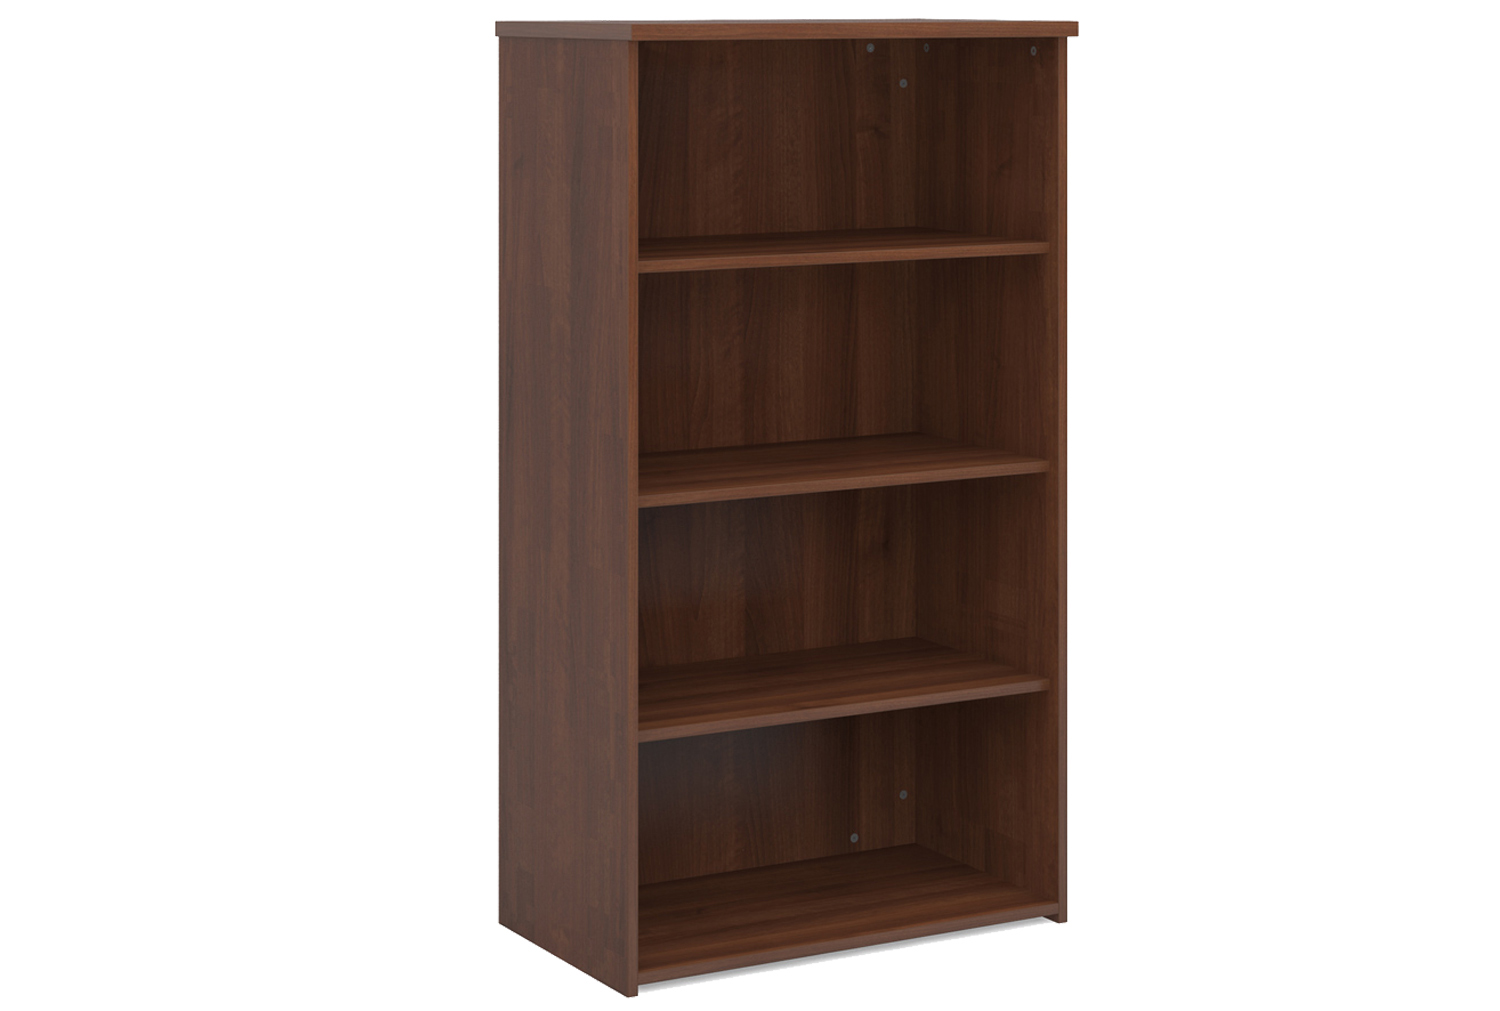 Tully Office Bookcases, 3 Shelf - 80wx47dx144h (cm), Walnut, Express Delivery